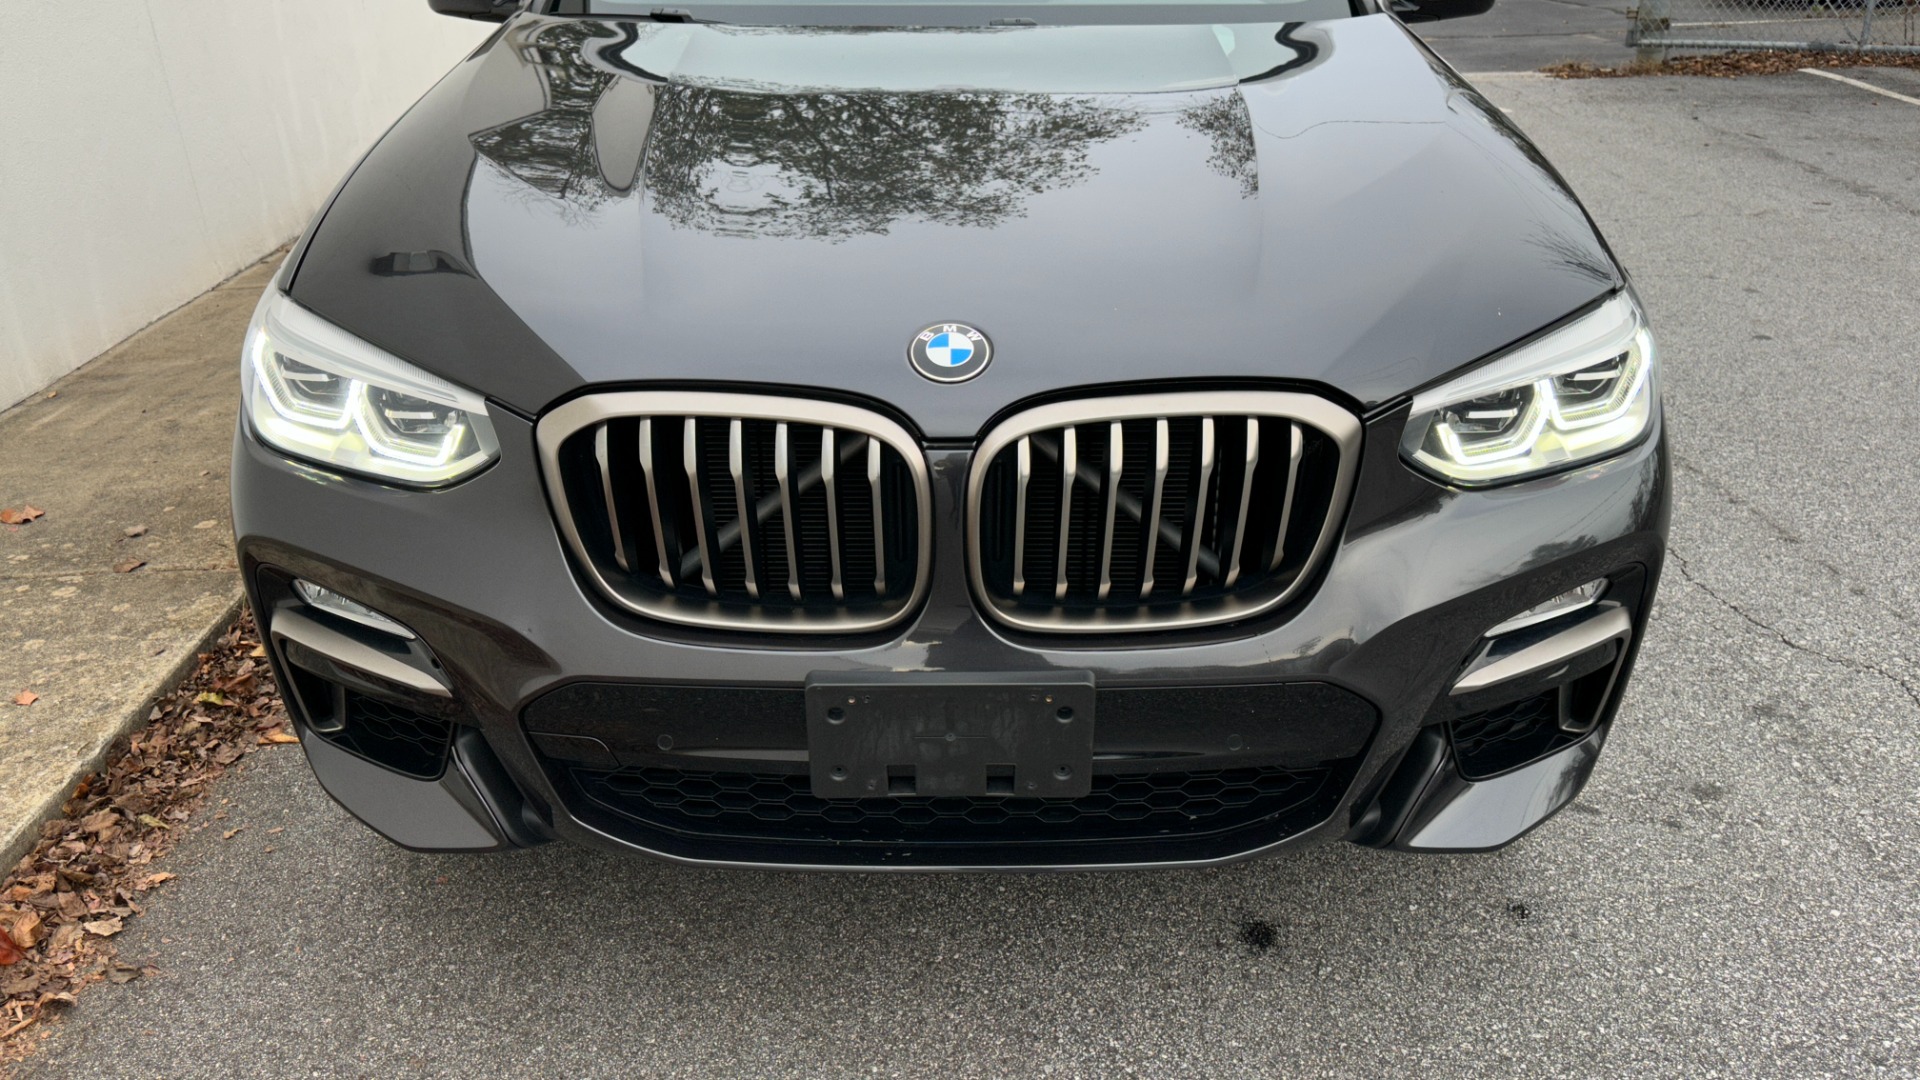 Used 2019 BMW X3 M40i / 21IN WHEELS / HEATED SEATS / NAVIGATION / HEATED STEERING for sale Sold at Formula Imports in Charlotte NC 28227 8